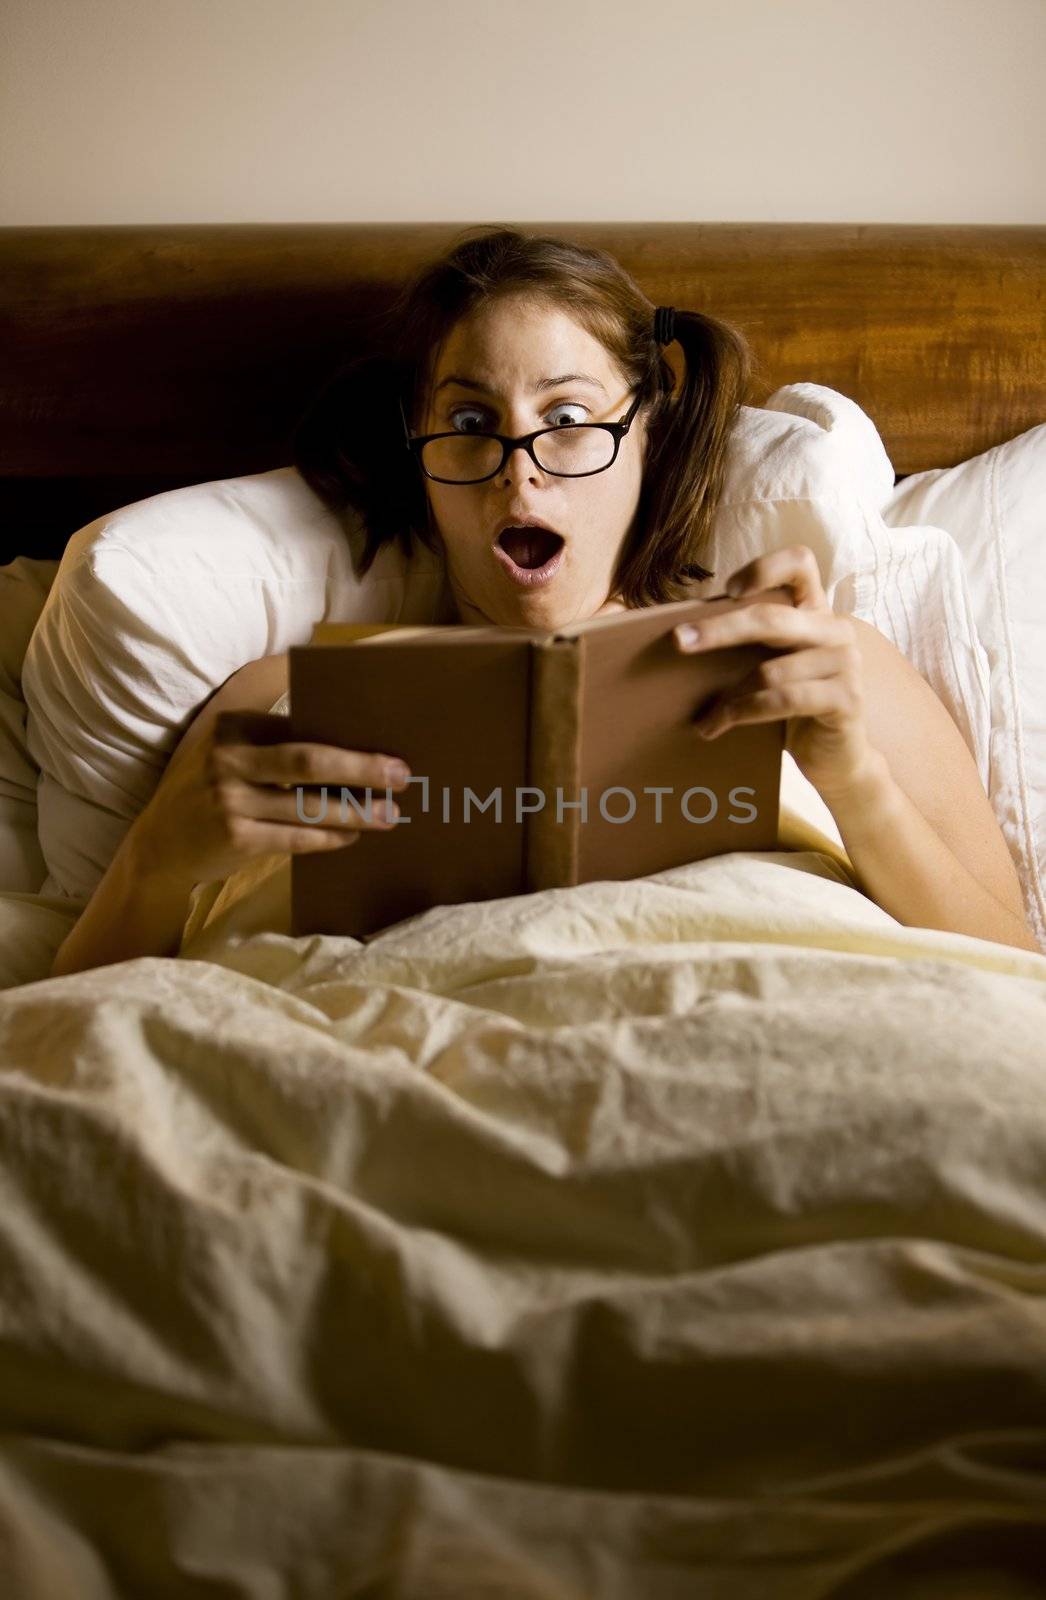 Woman reading in bed with a shocked expression